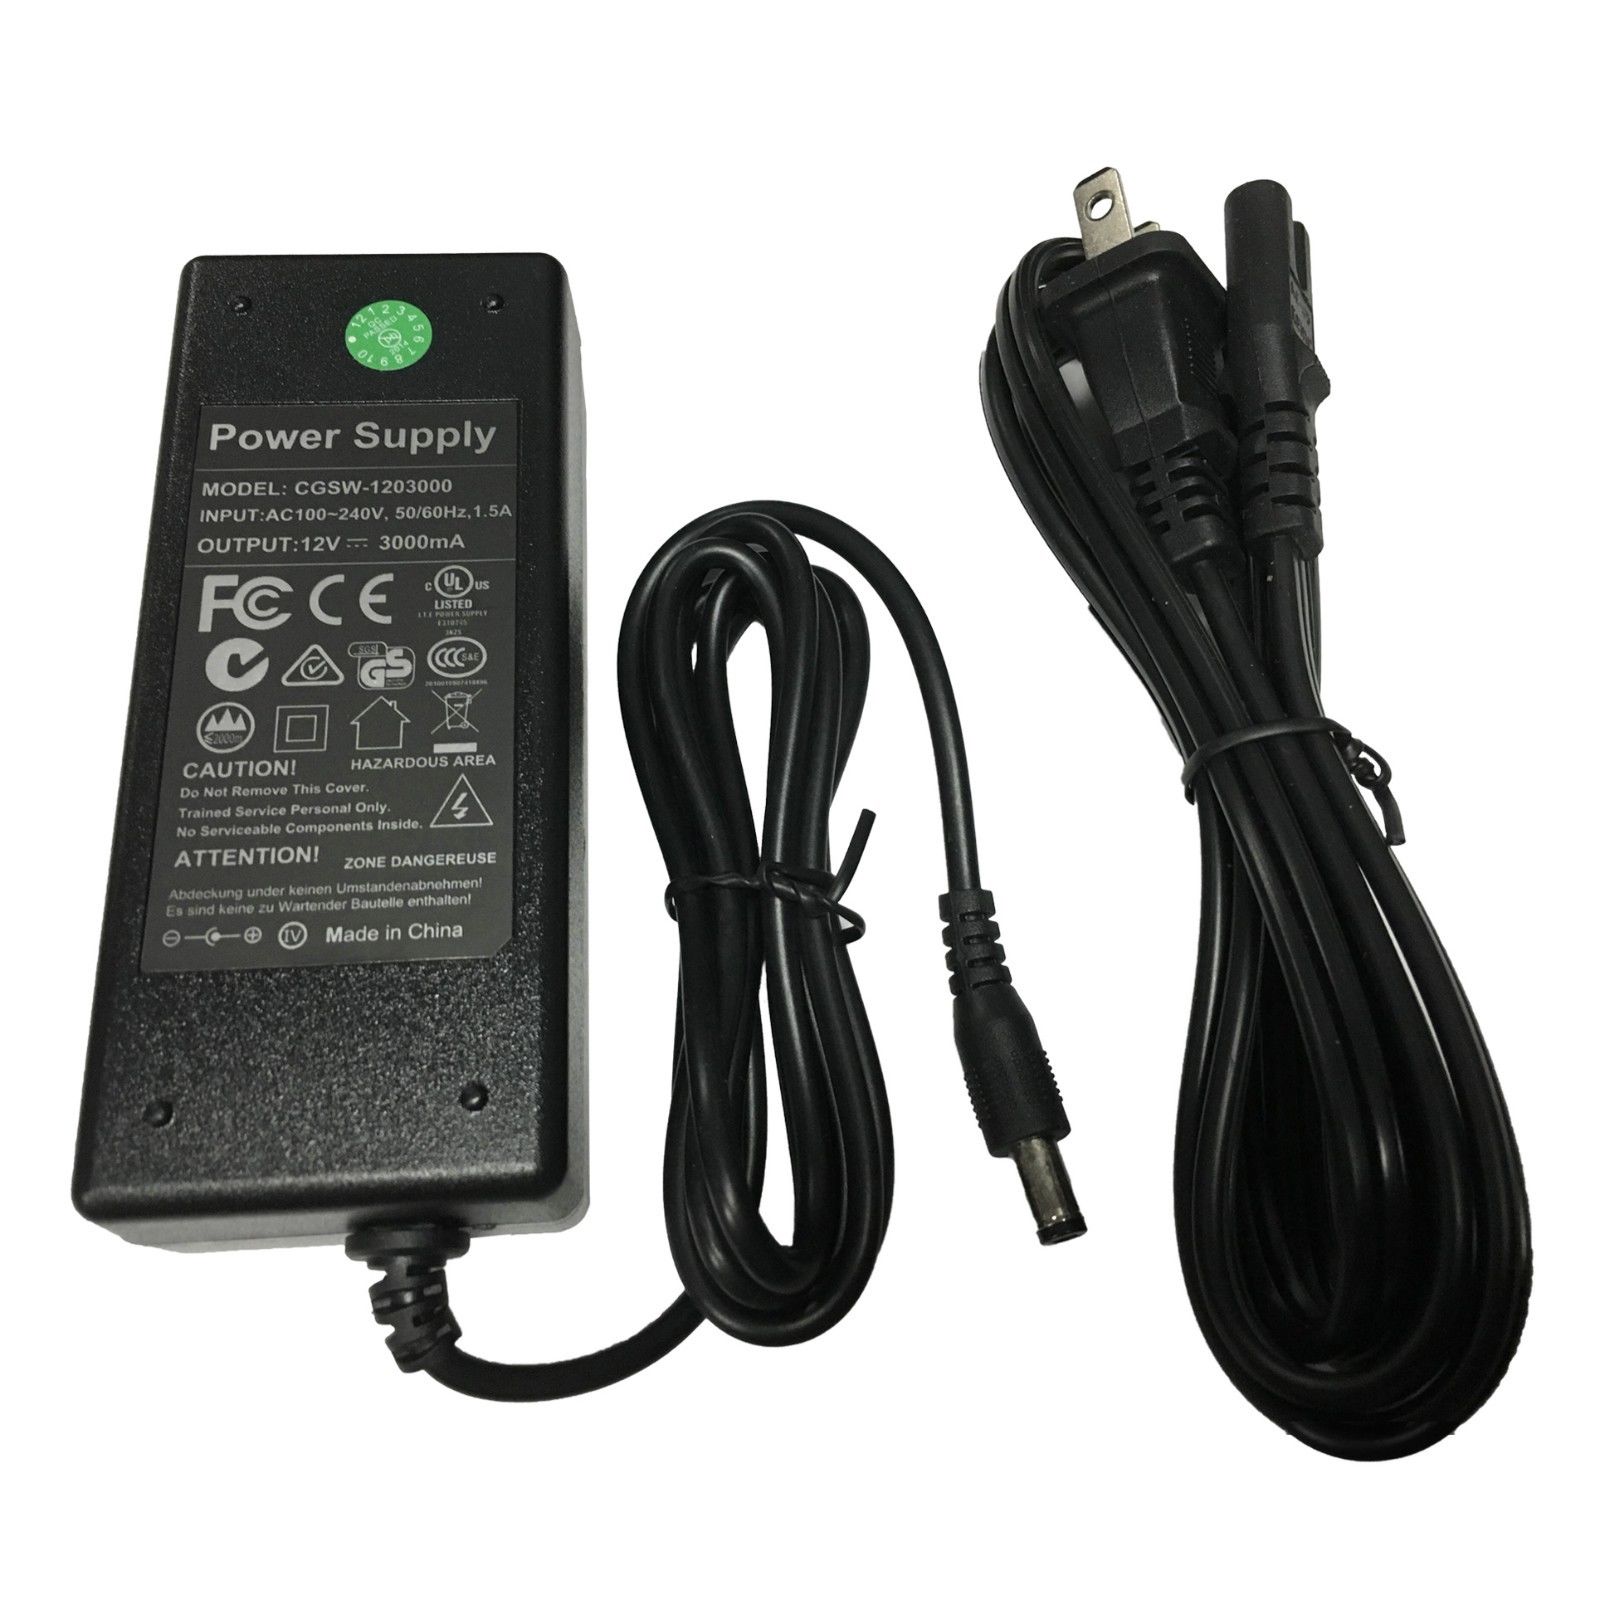 AC Adapter Model CGSW-1203000 12V 3A [3000mAh] Power Supply Cord Charger PSU